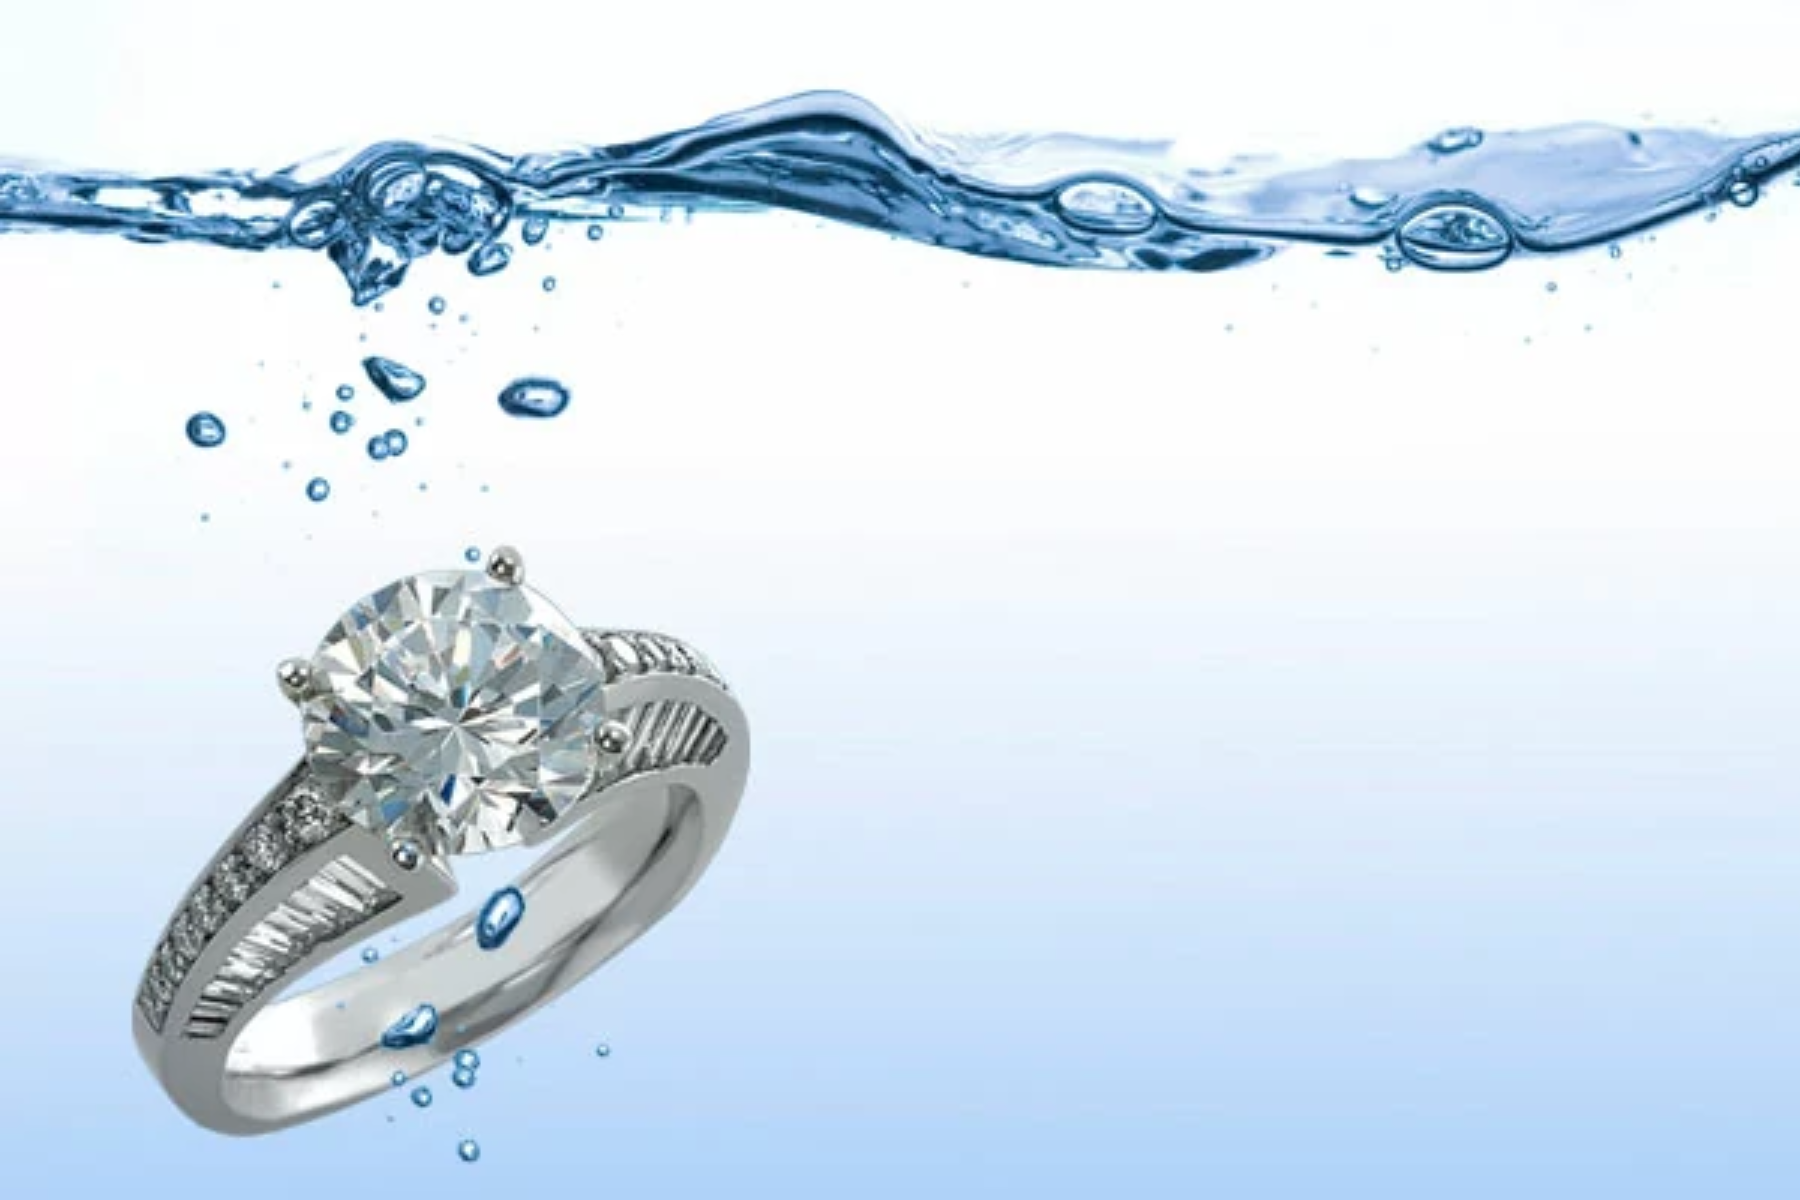 A ring dropped in the water